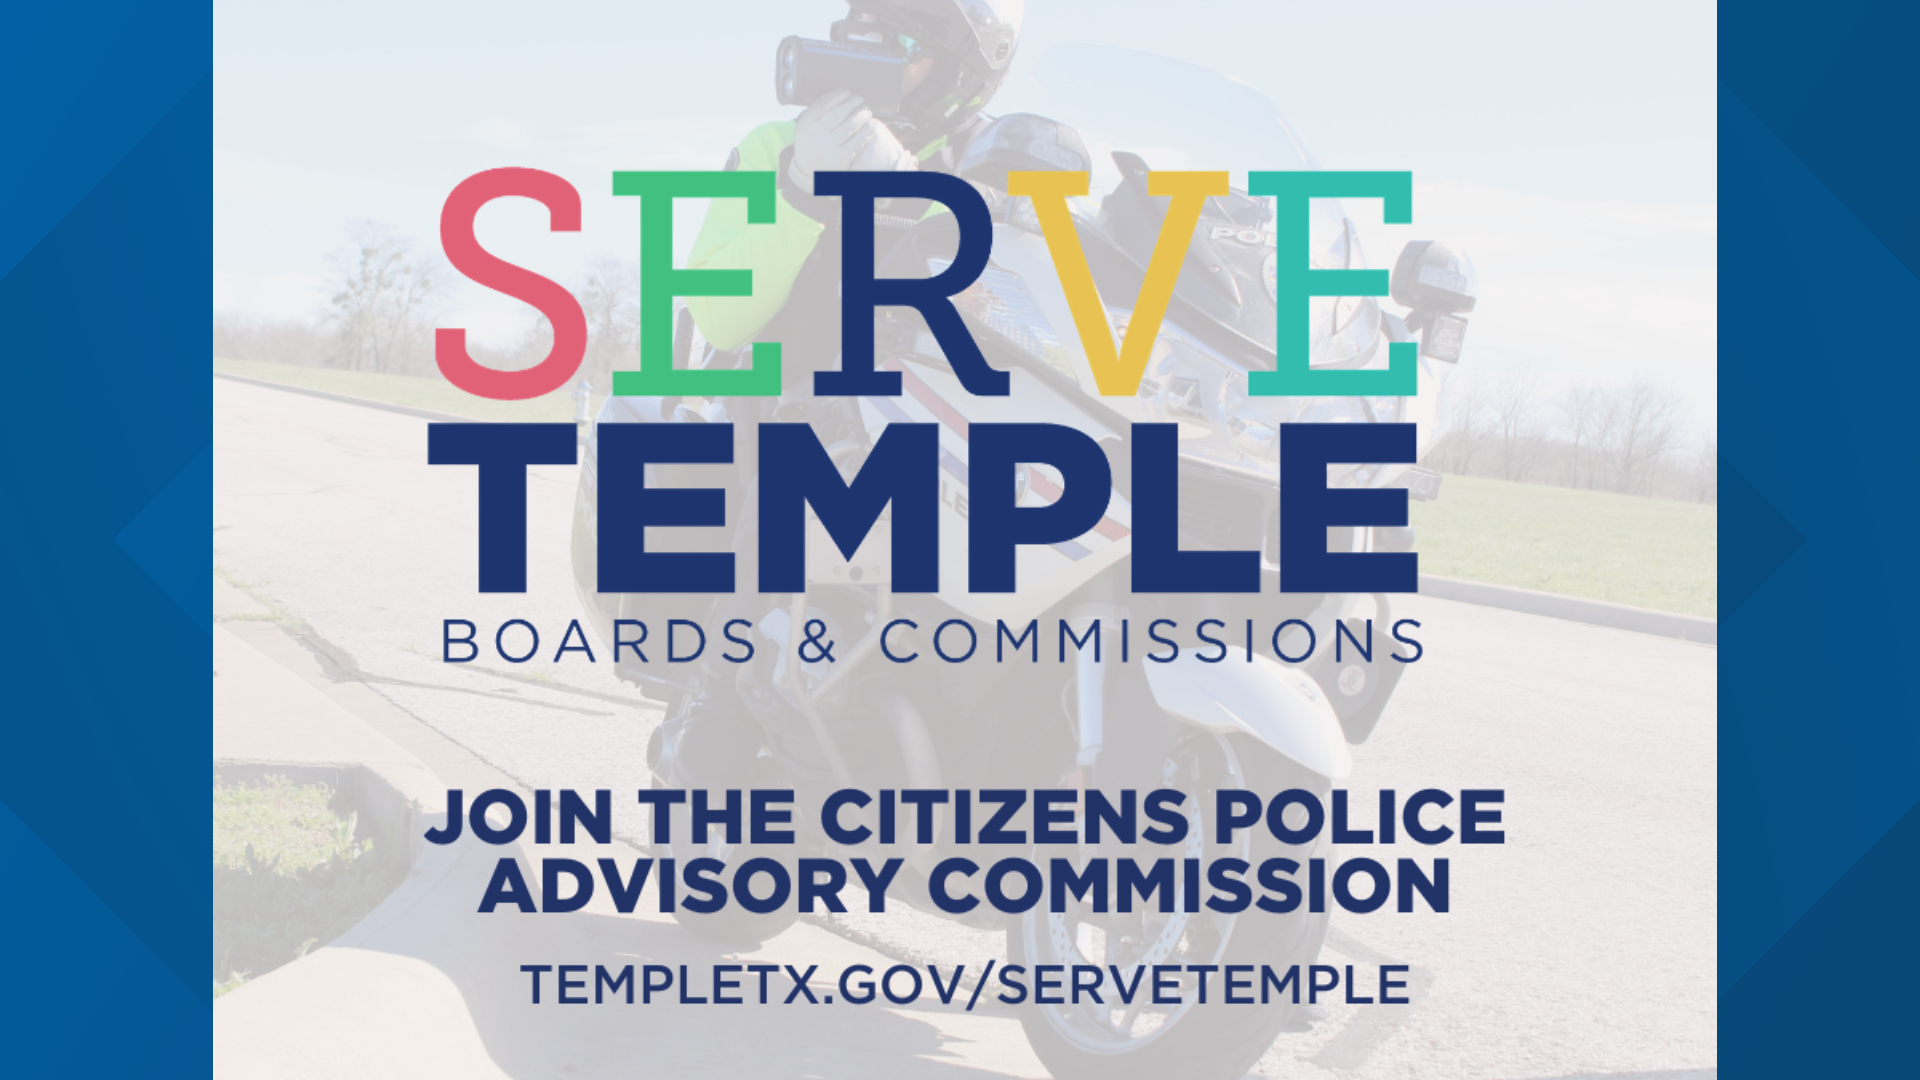 The city recently created 7 new boards and commissions that people can apply to serve on. Applications are currently open.